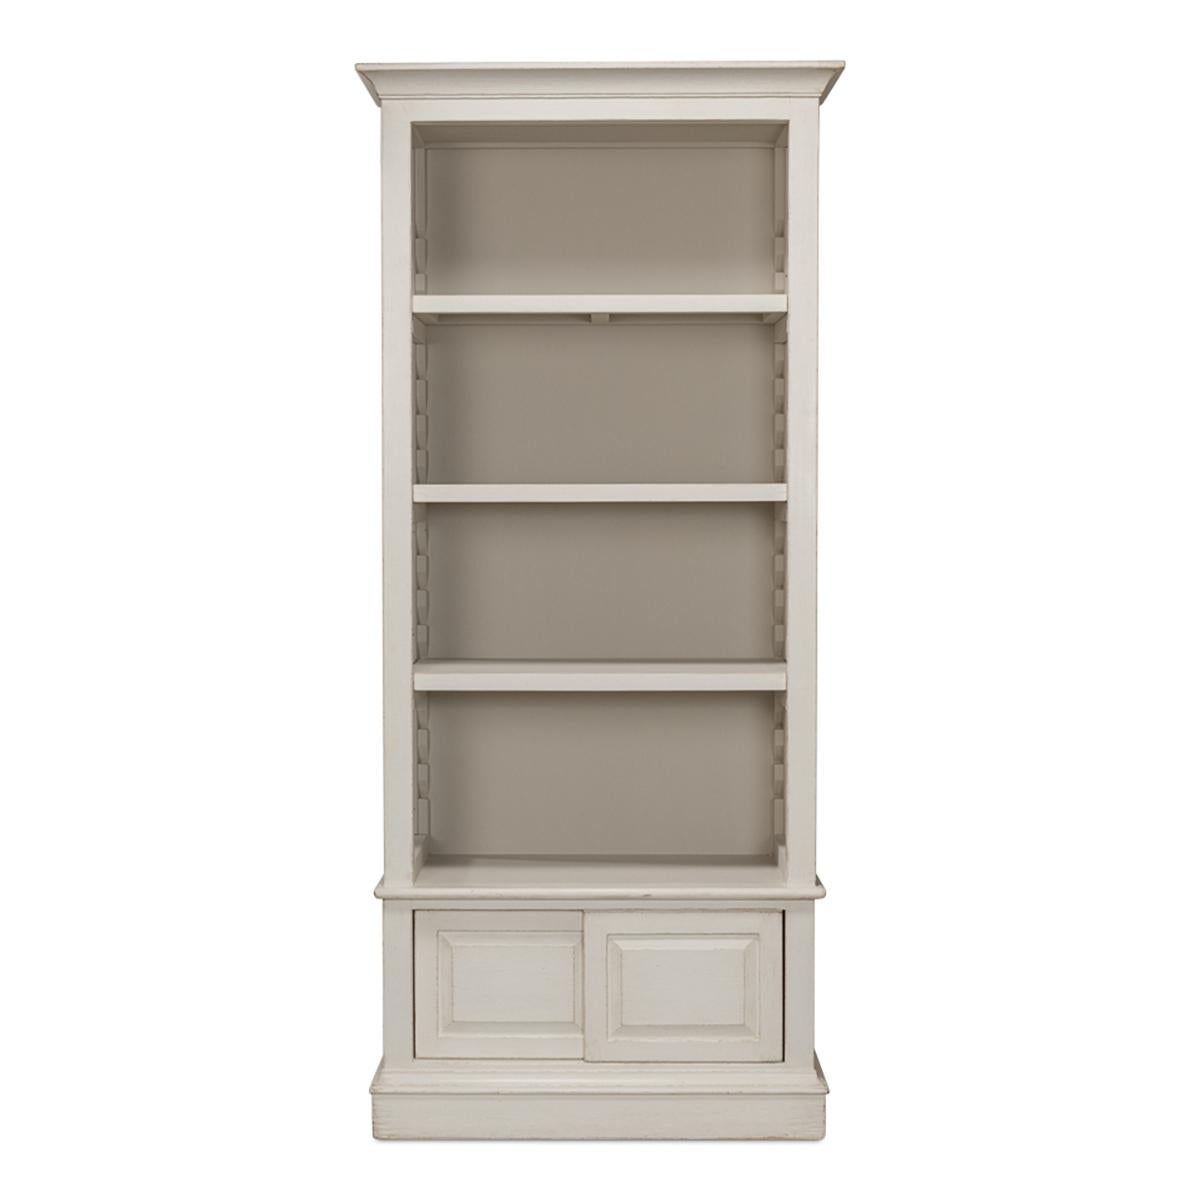 A classic look that will complement a variety of home decor styles. The adjustable shelves make it easy to customize the bookcase to accommodate books and other items of different sizes.

The glass sides of the bookcase allow for the contents to be